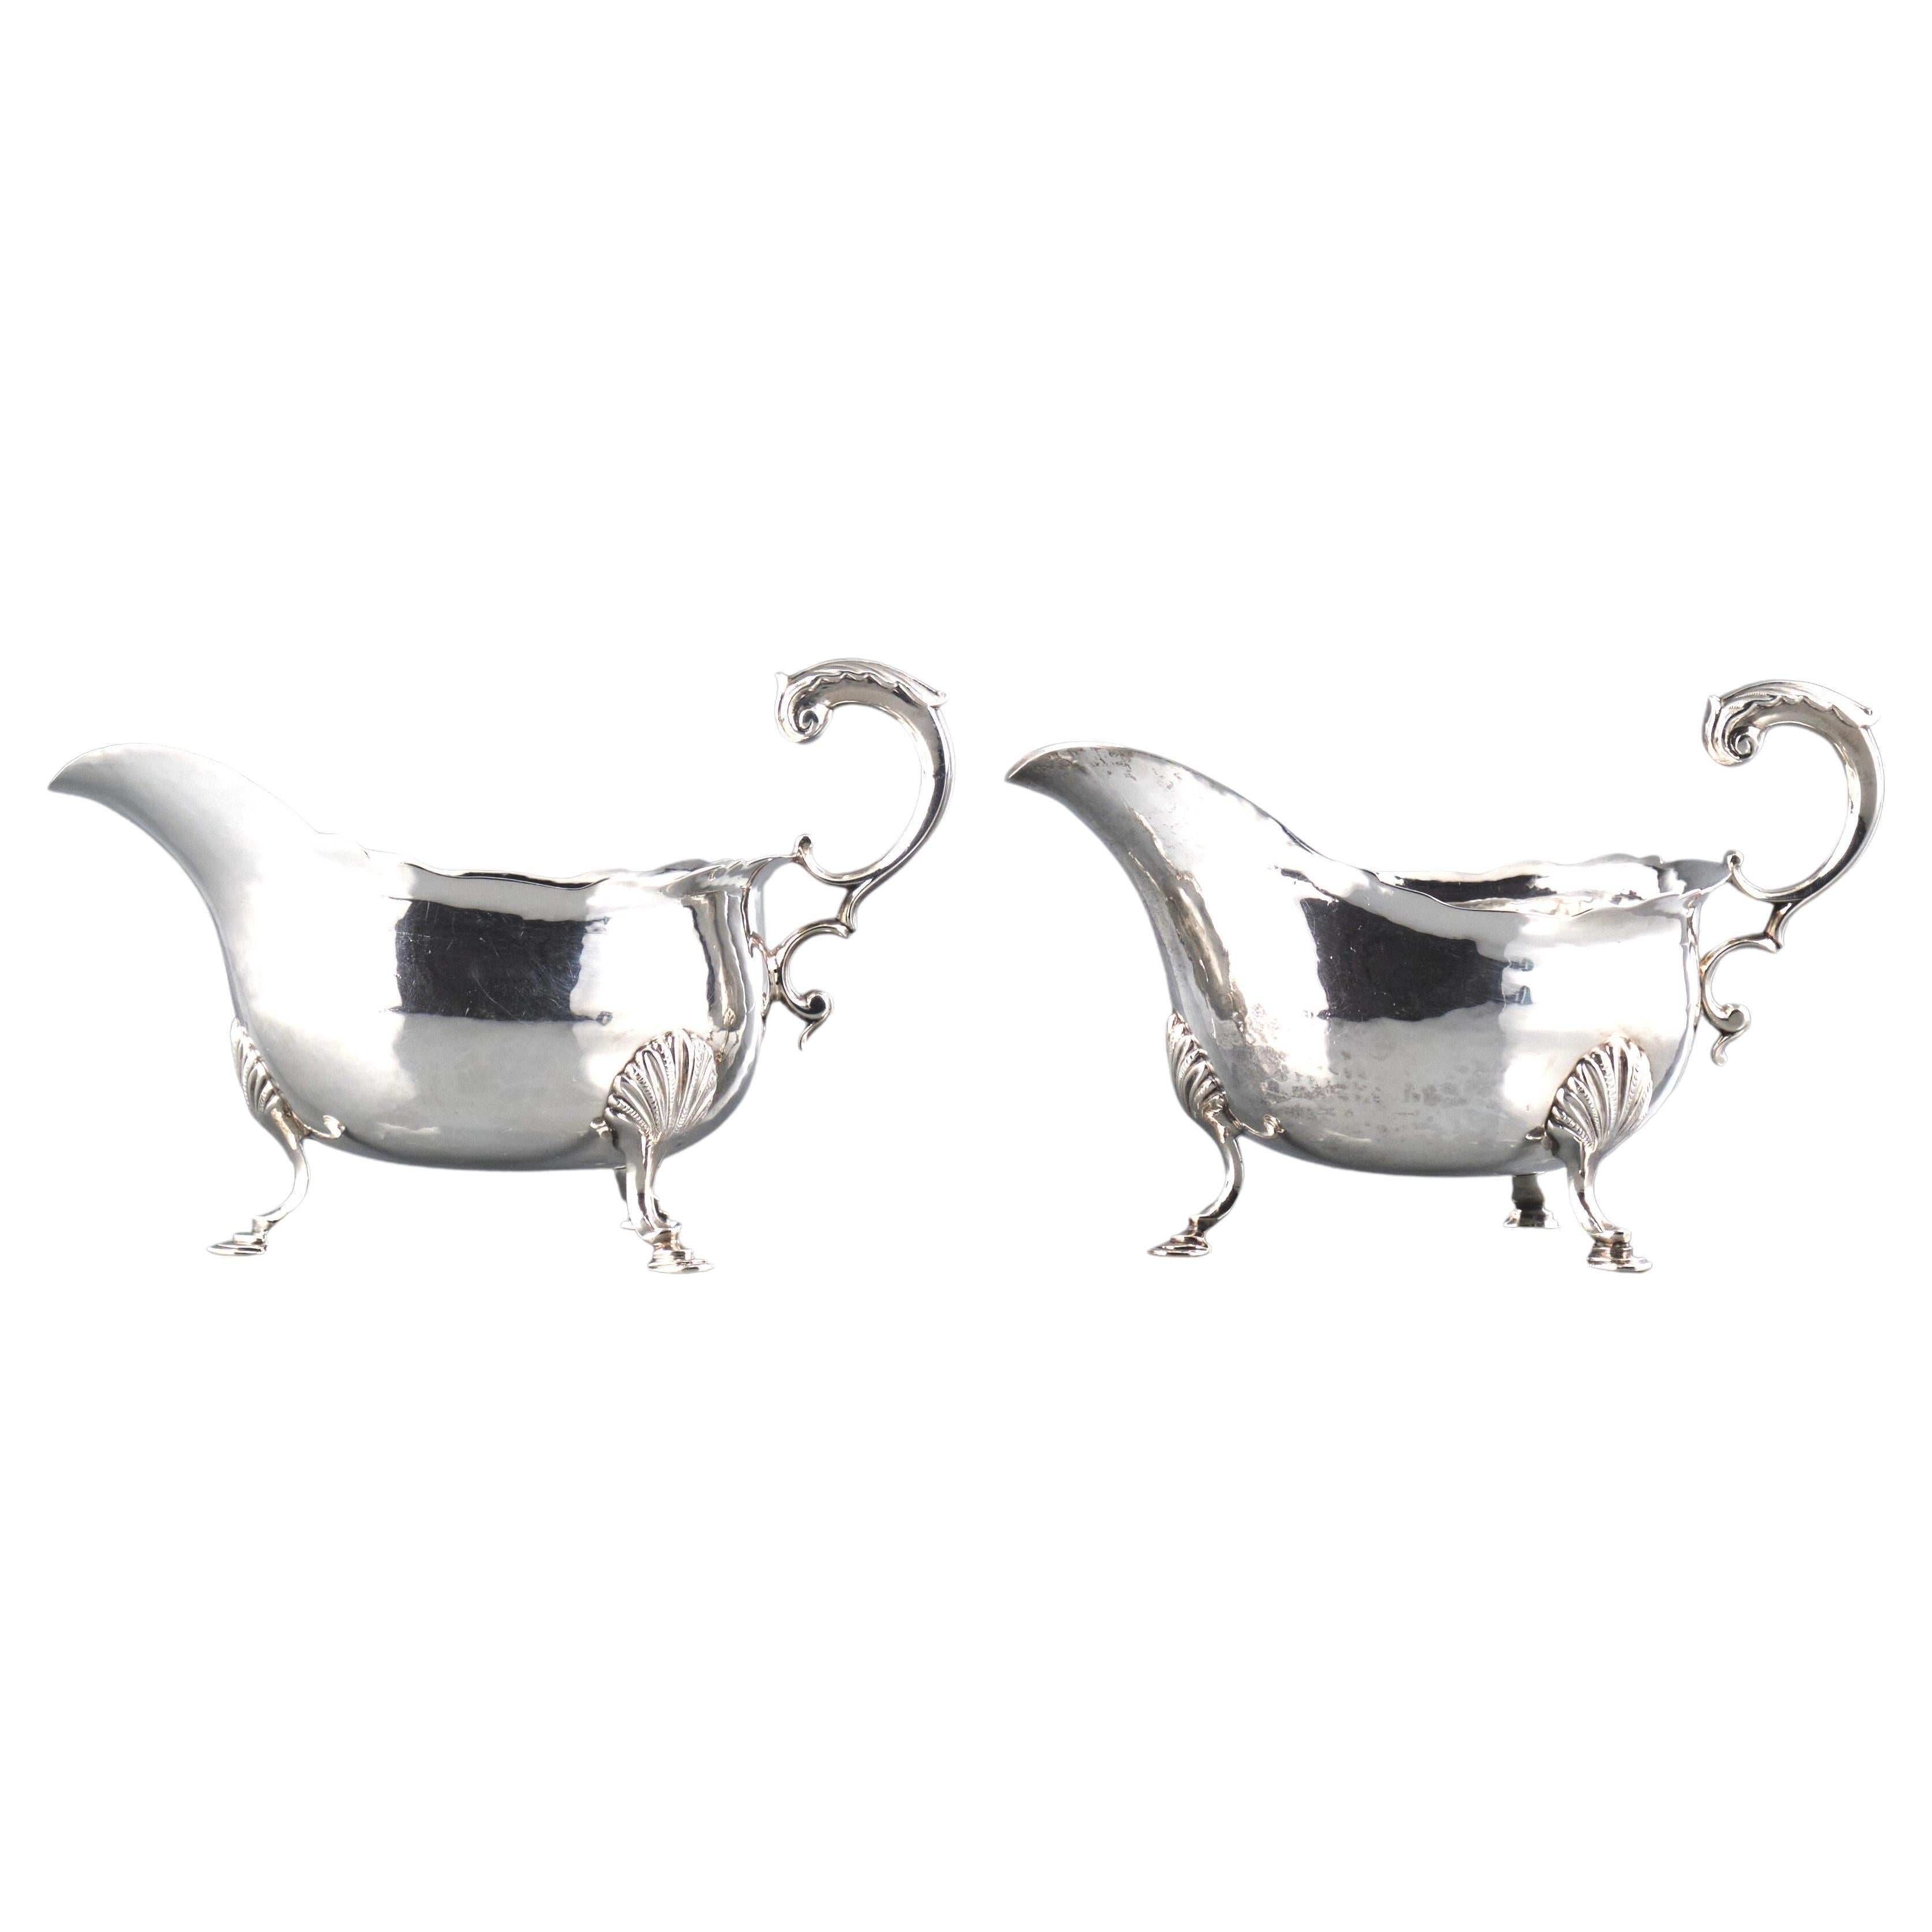 Fine Pair of Mid 18th Century Georgian Sterling Silver Sauce Boats, London 1762